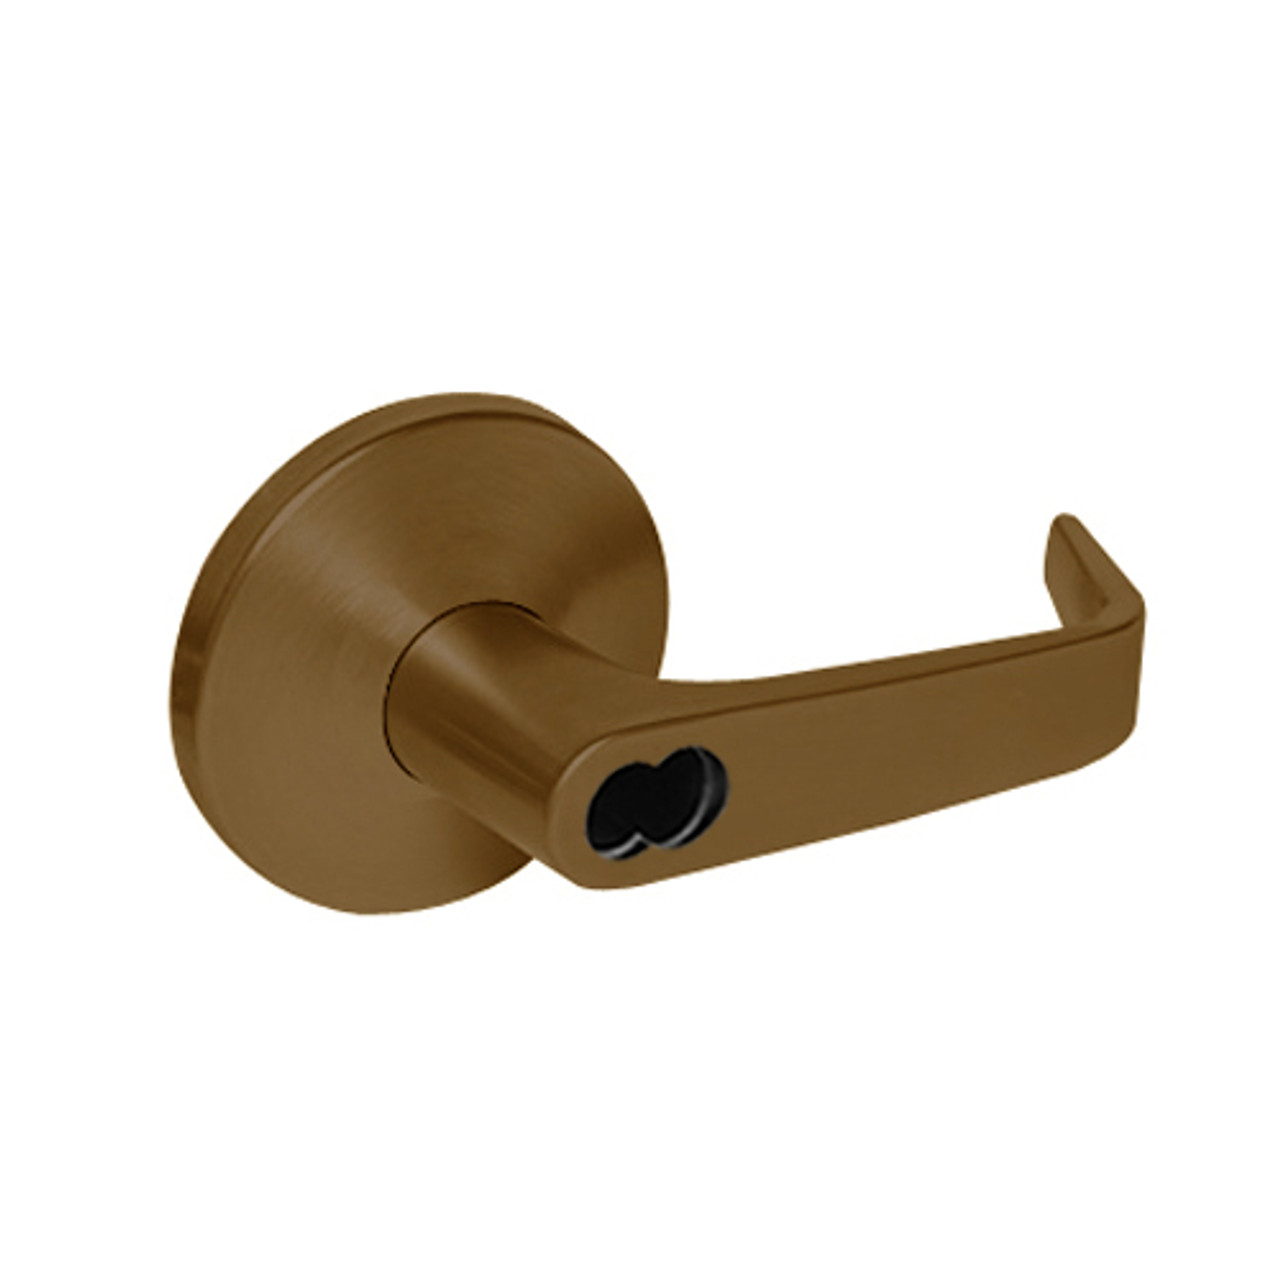 9K37HJ15LSTK690 Best 9K Series Hotel Cylindrical Lever Locks with Contour Angle with Return Lever Design Accept 7 Pin Best Core in Dark Bronze